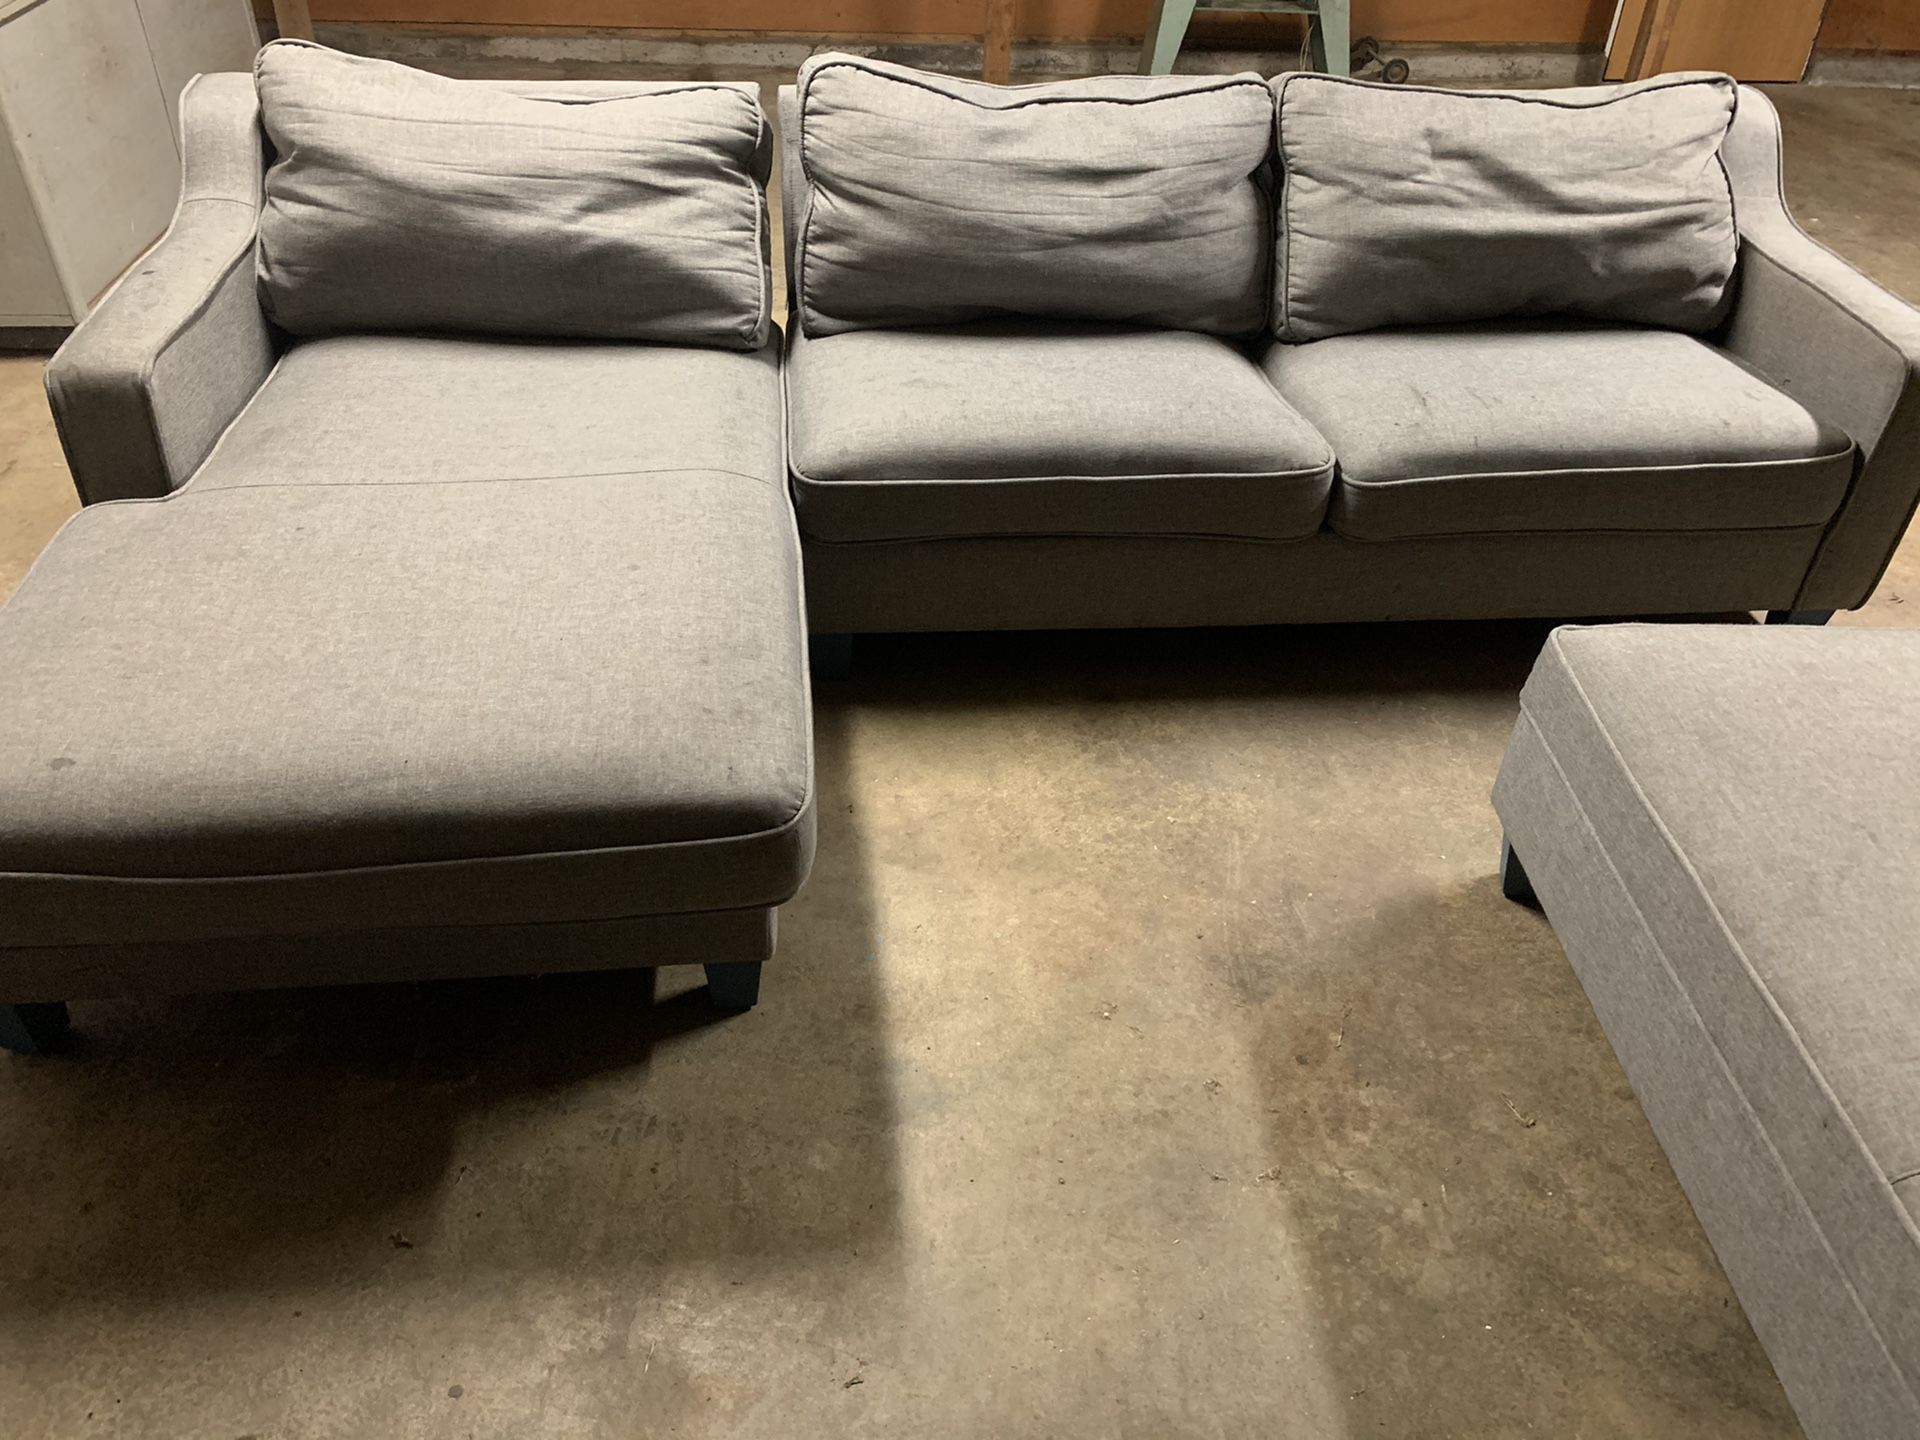 Couch for free - pending pickup